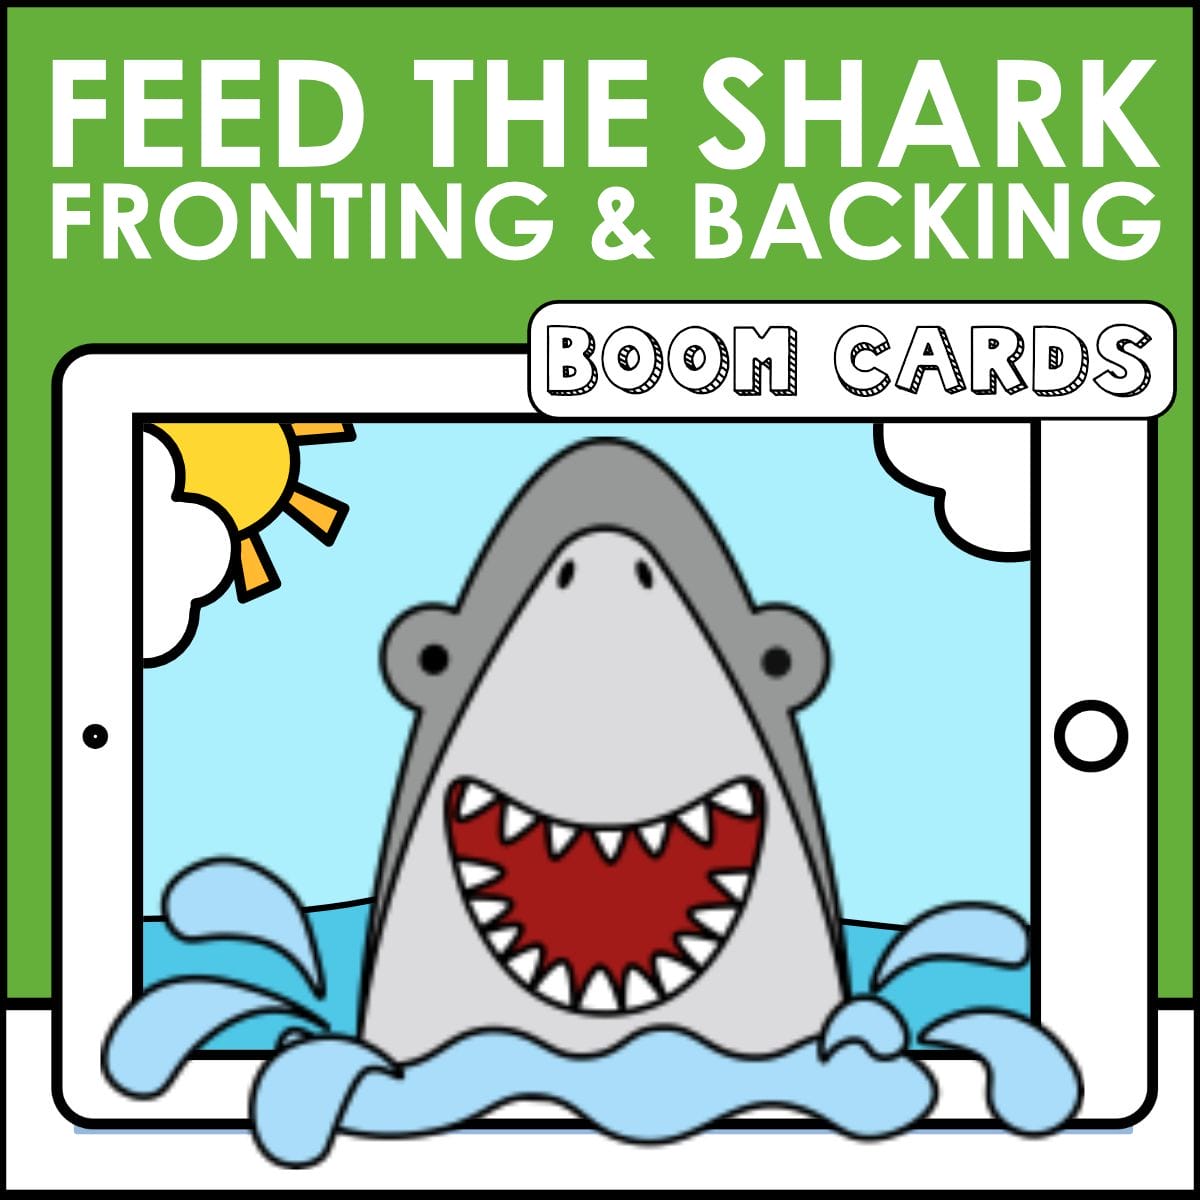 Feed the Shark Categories Boom Cards